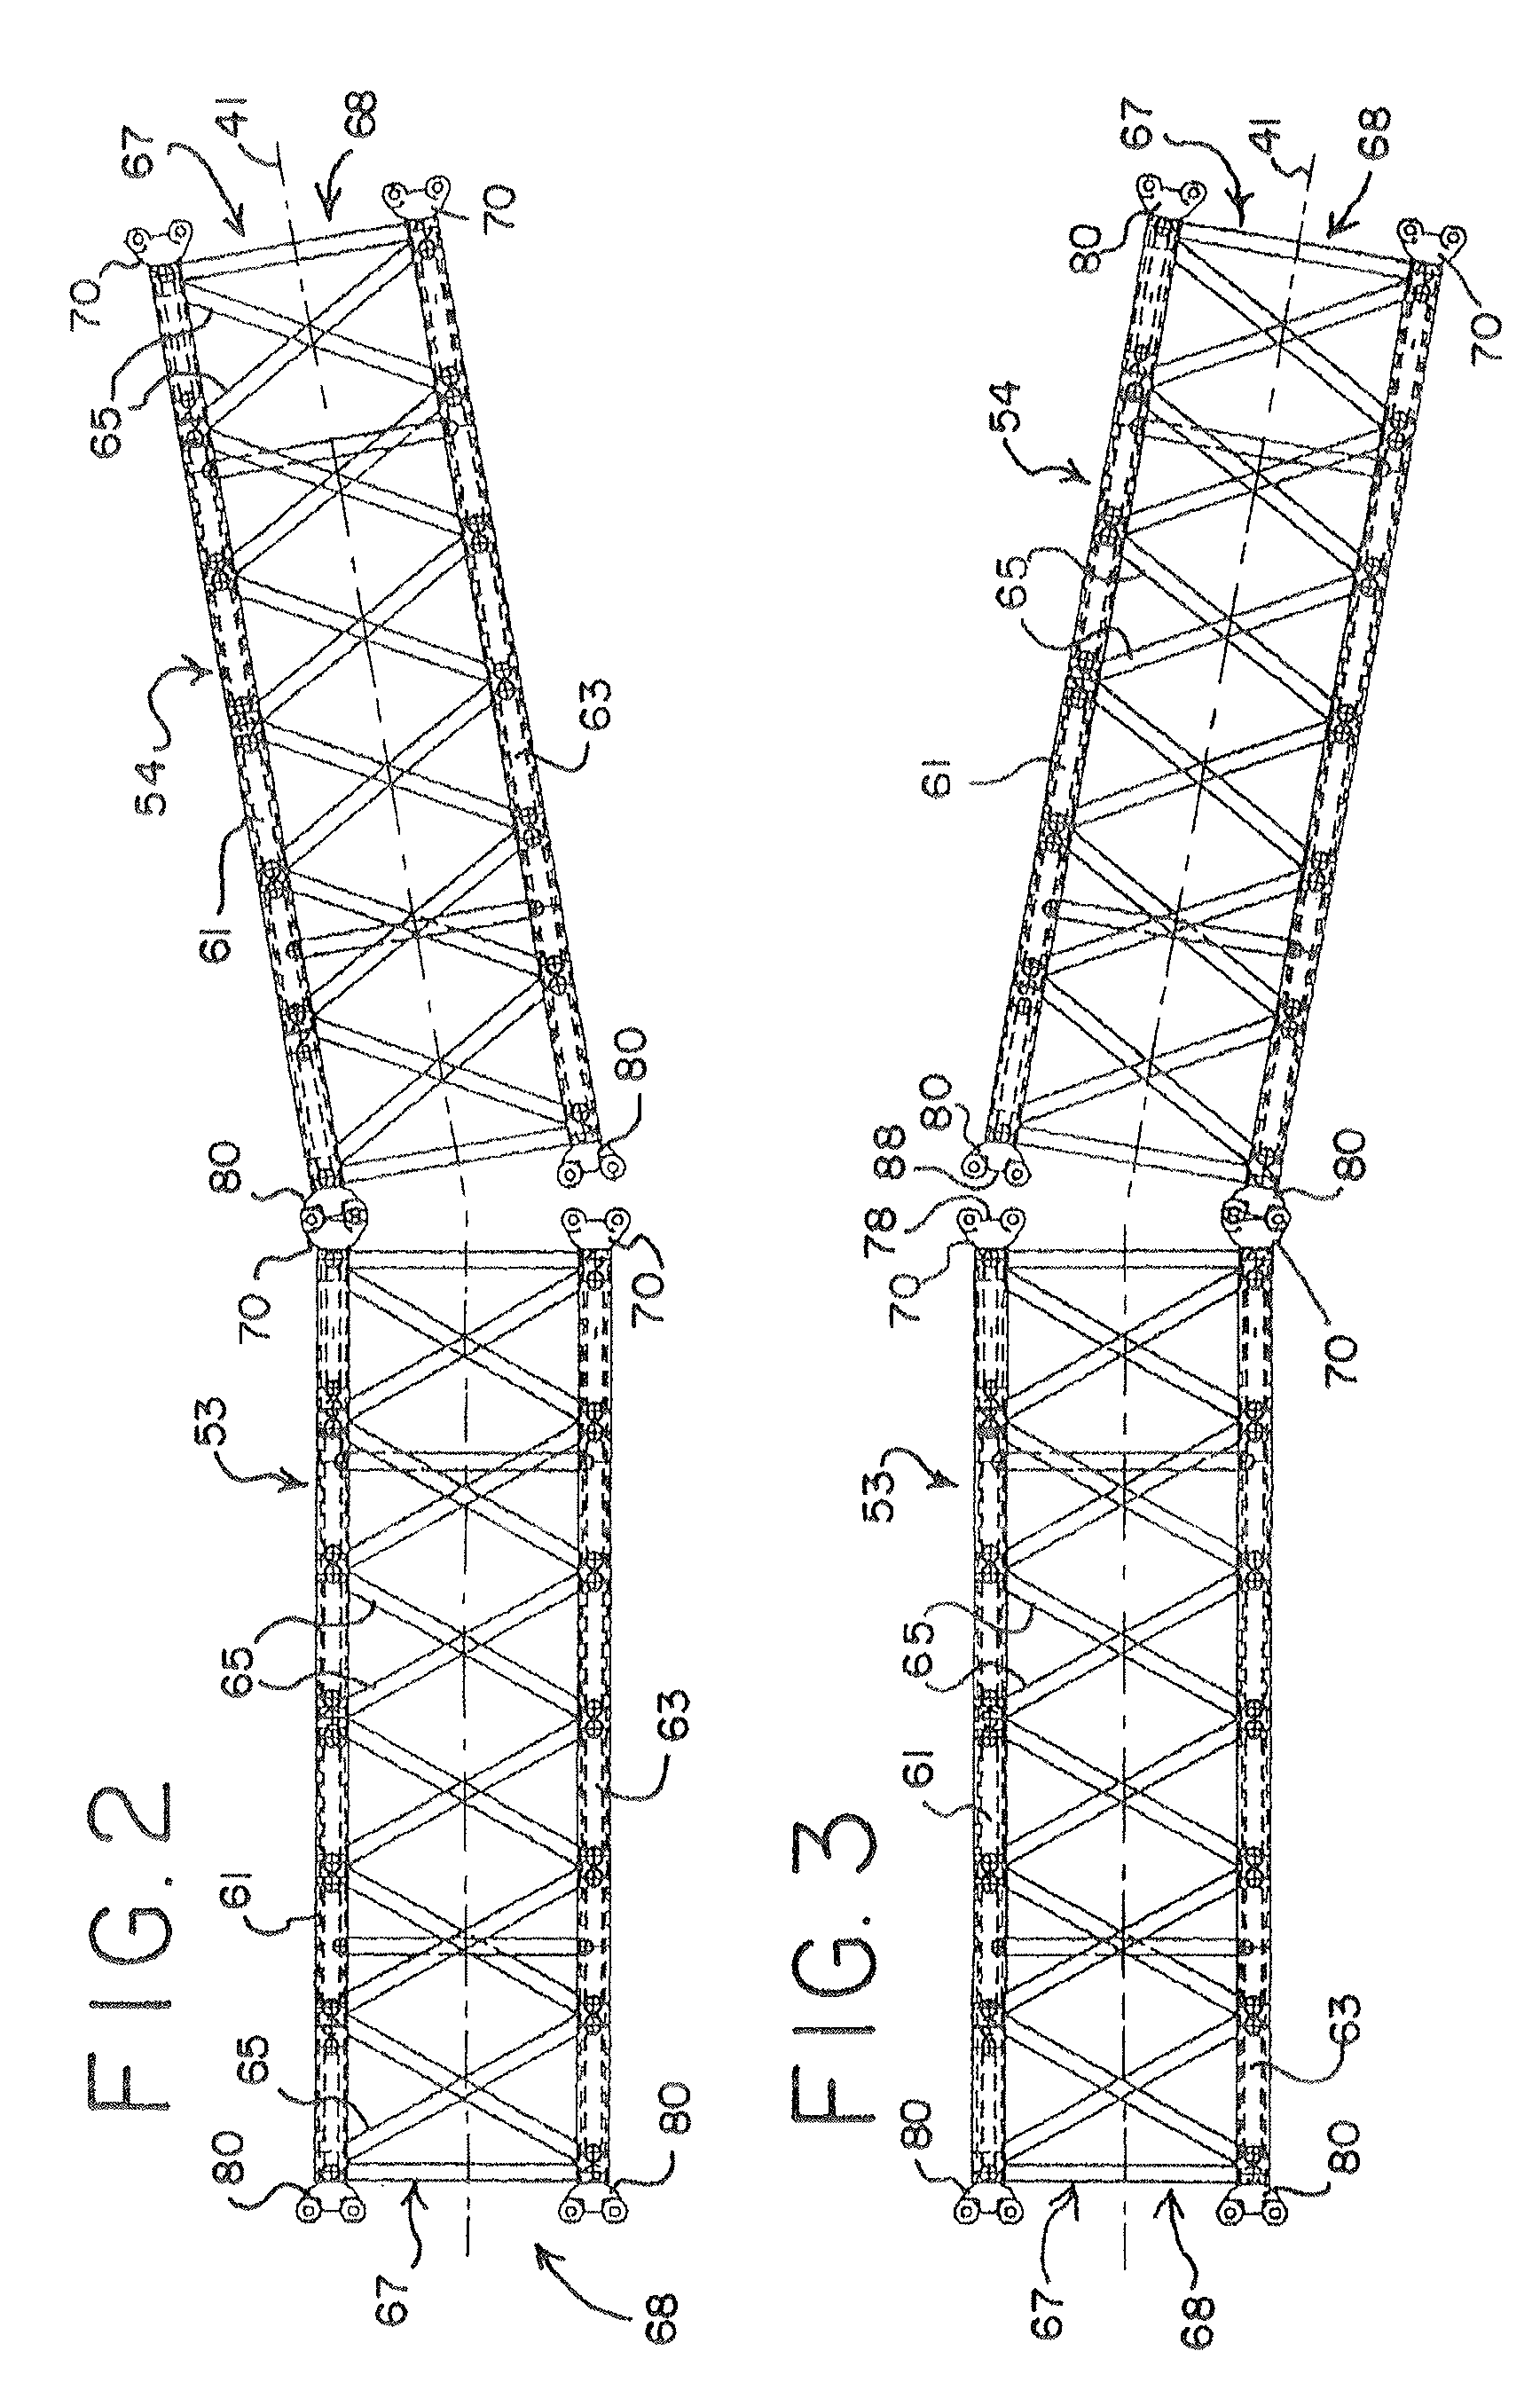 Pinned connection system for crane column segments